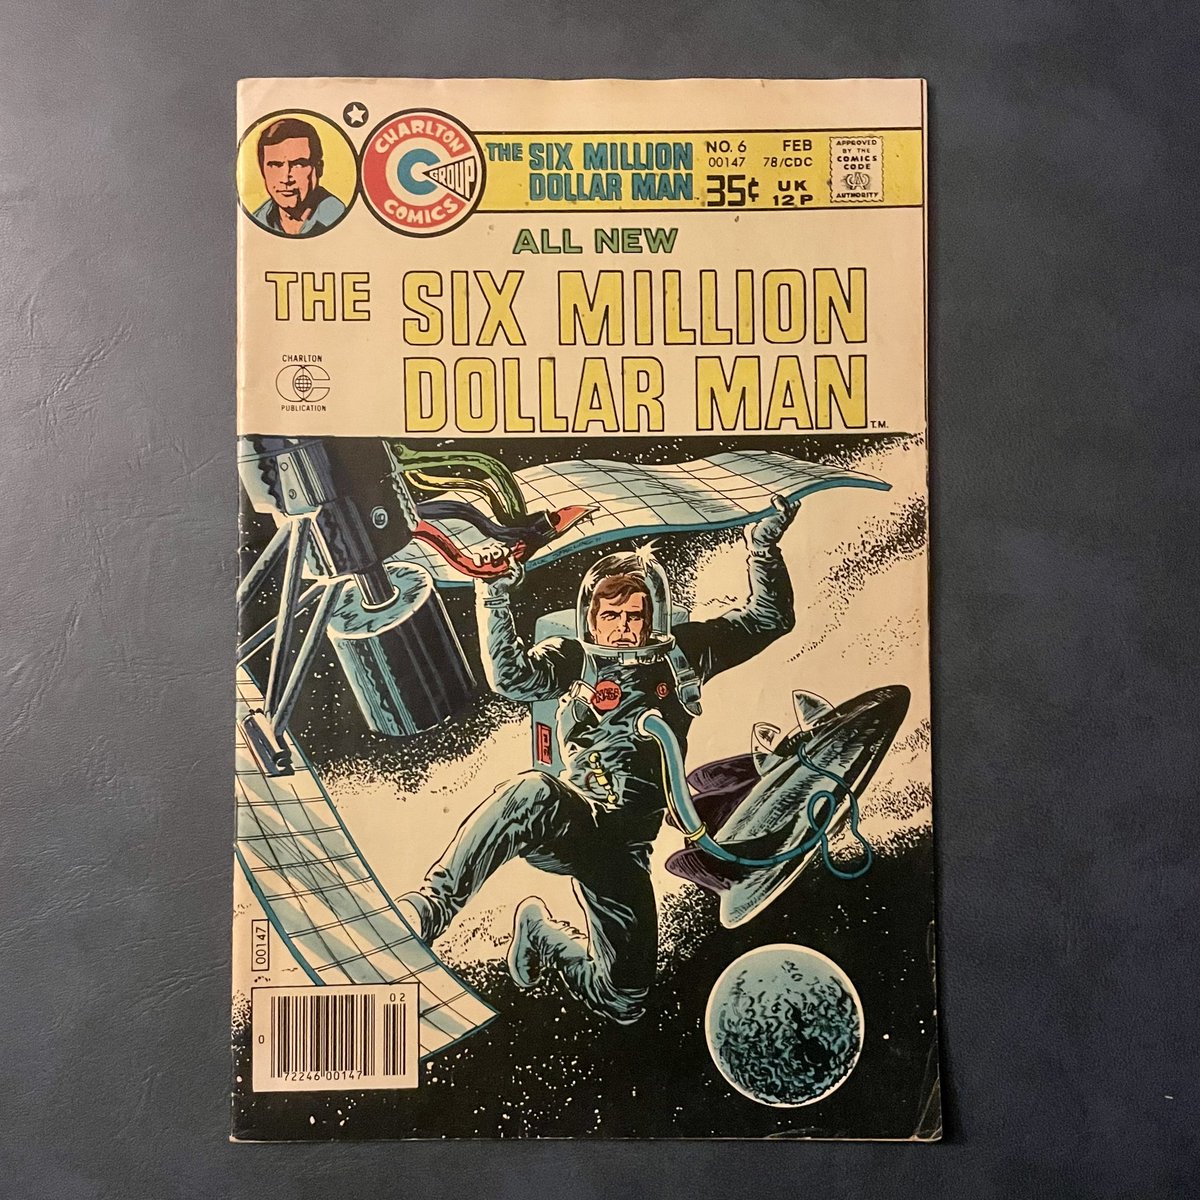 Found some unique things yesterday…I mean, never in a million years did I think that a comic book of #TheDirtyDozen existed, but here we are… #startrek #bigboy #thesixmilliondollarman #comicbooks #comics #oldcomics #vintagecomics #pittsburgh #shopsmall #shoplocal